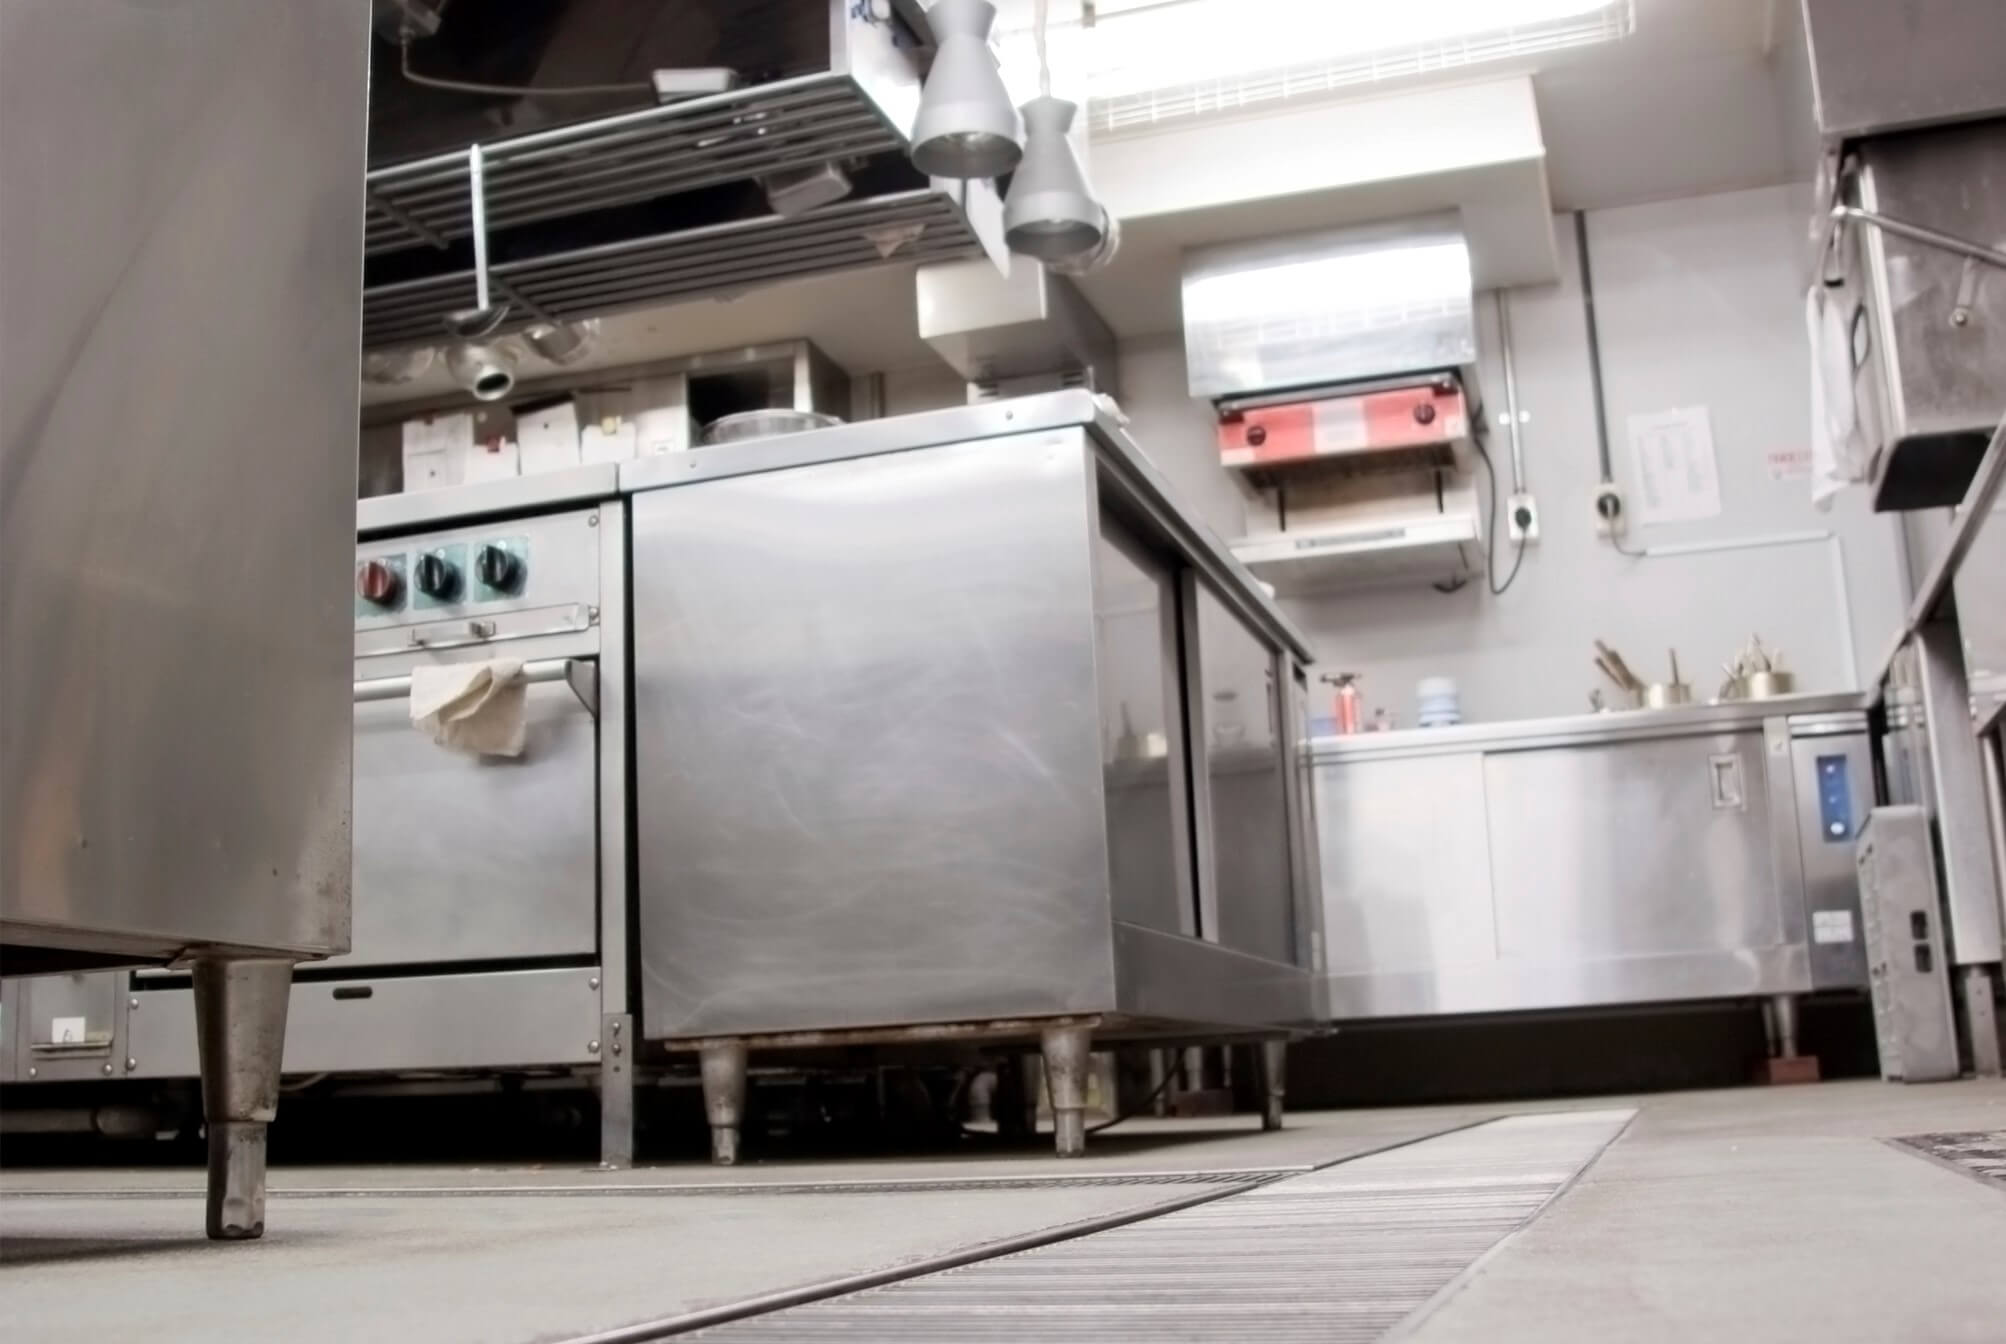 Inside an empty commercial restaurant kitchen, a view from the floor.